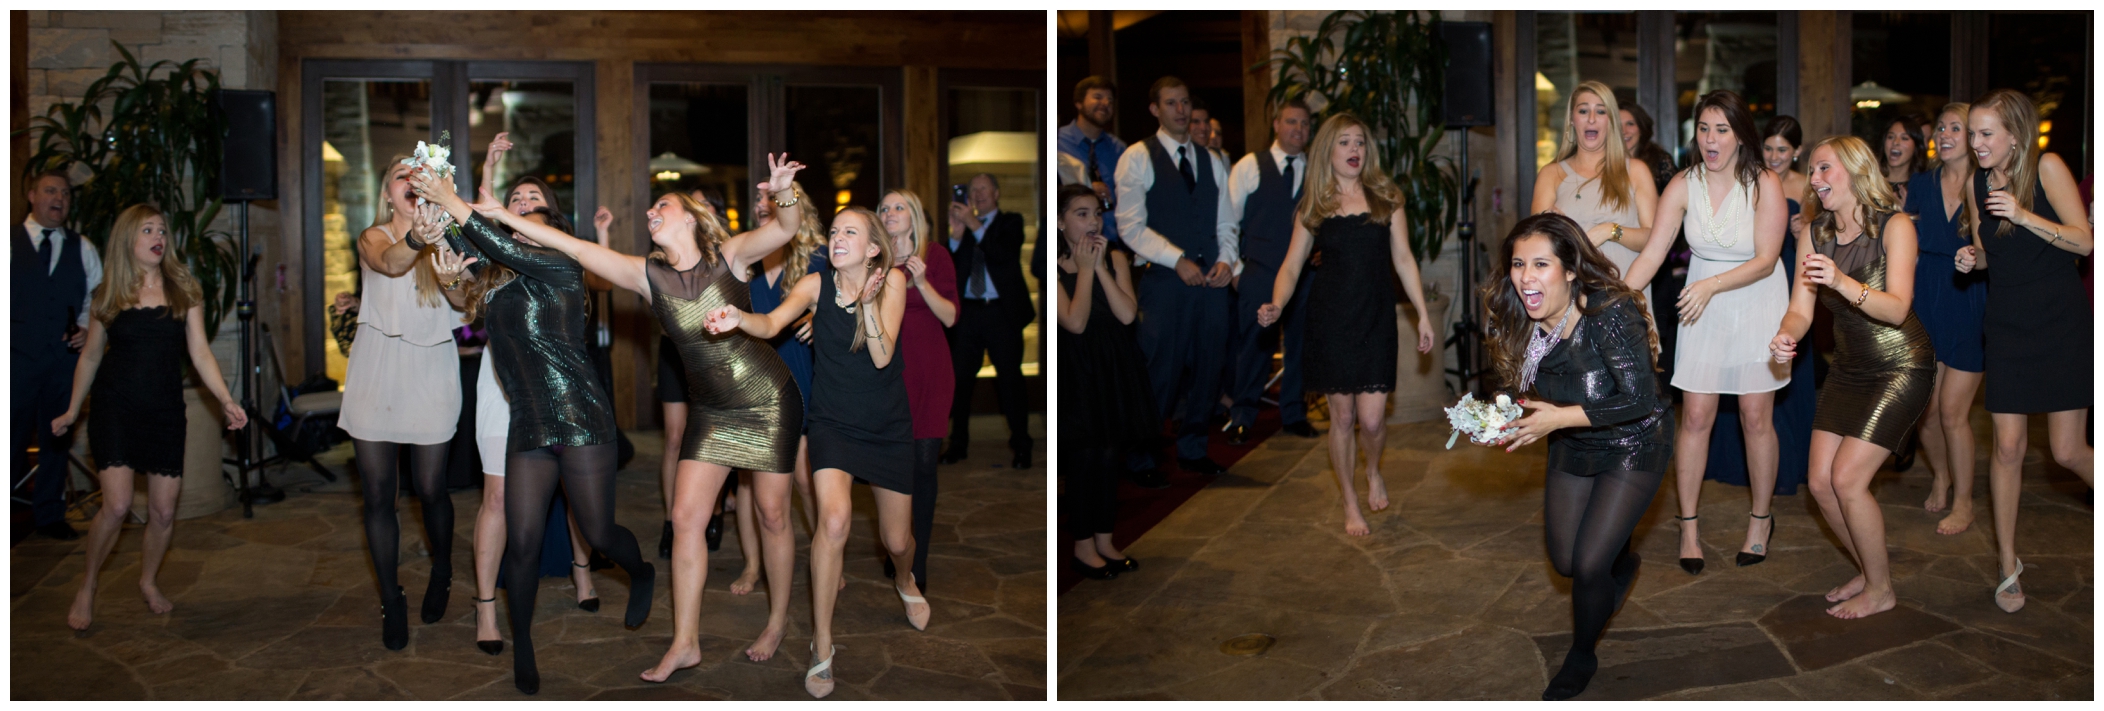 picture of bouquet toss at Colorado mountain wedding 